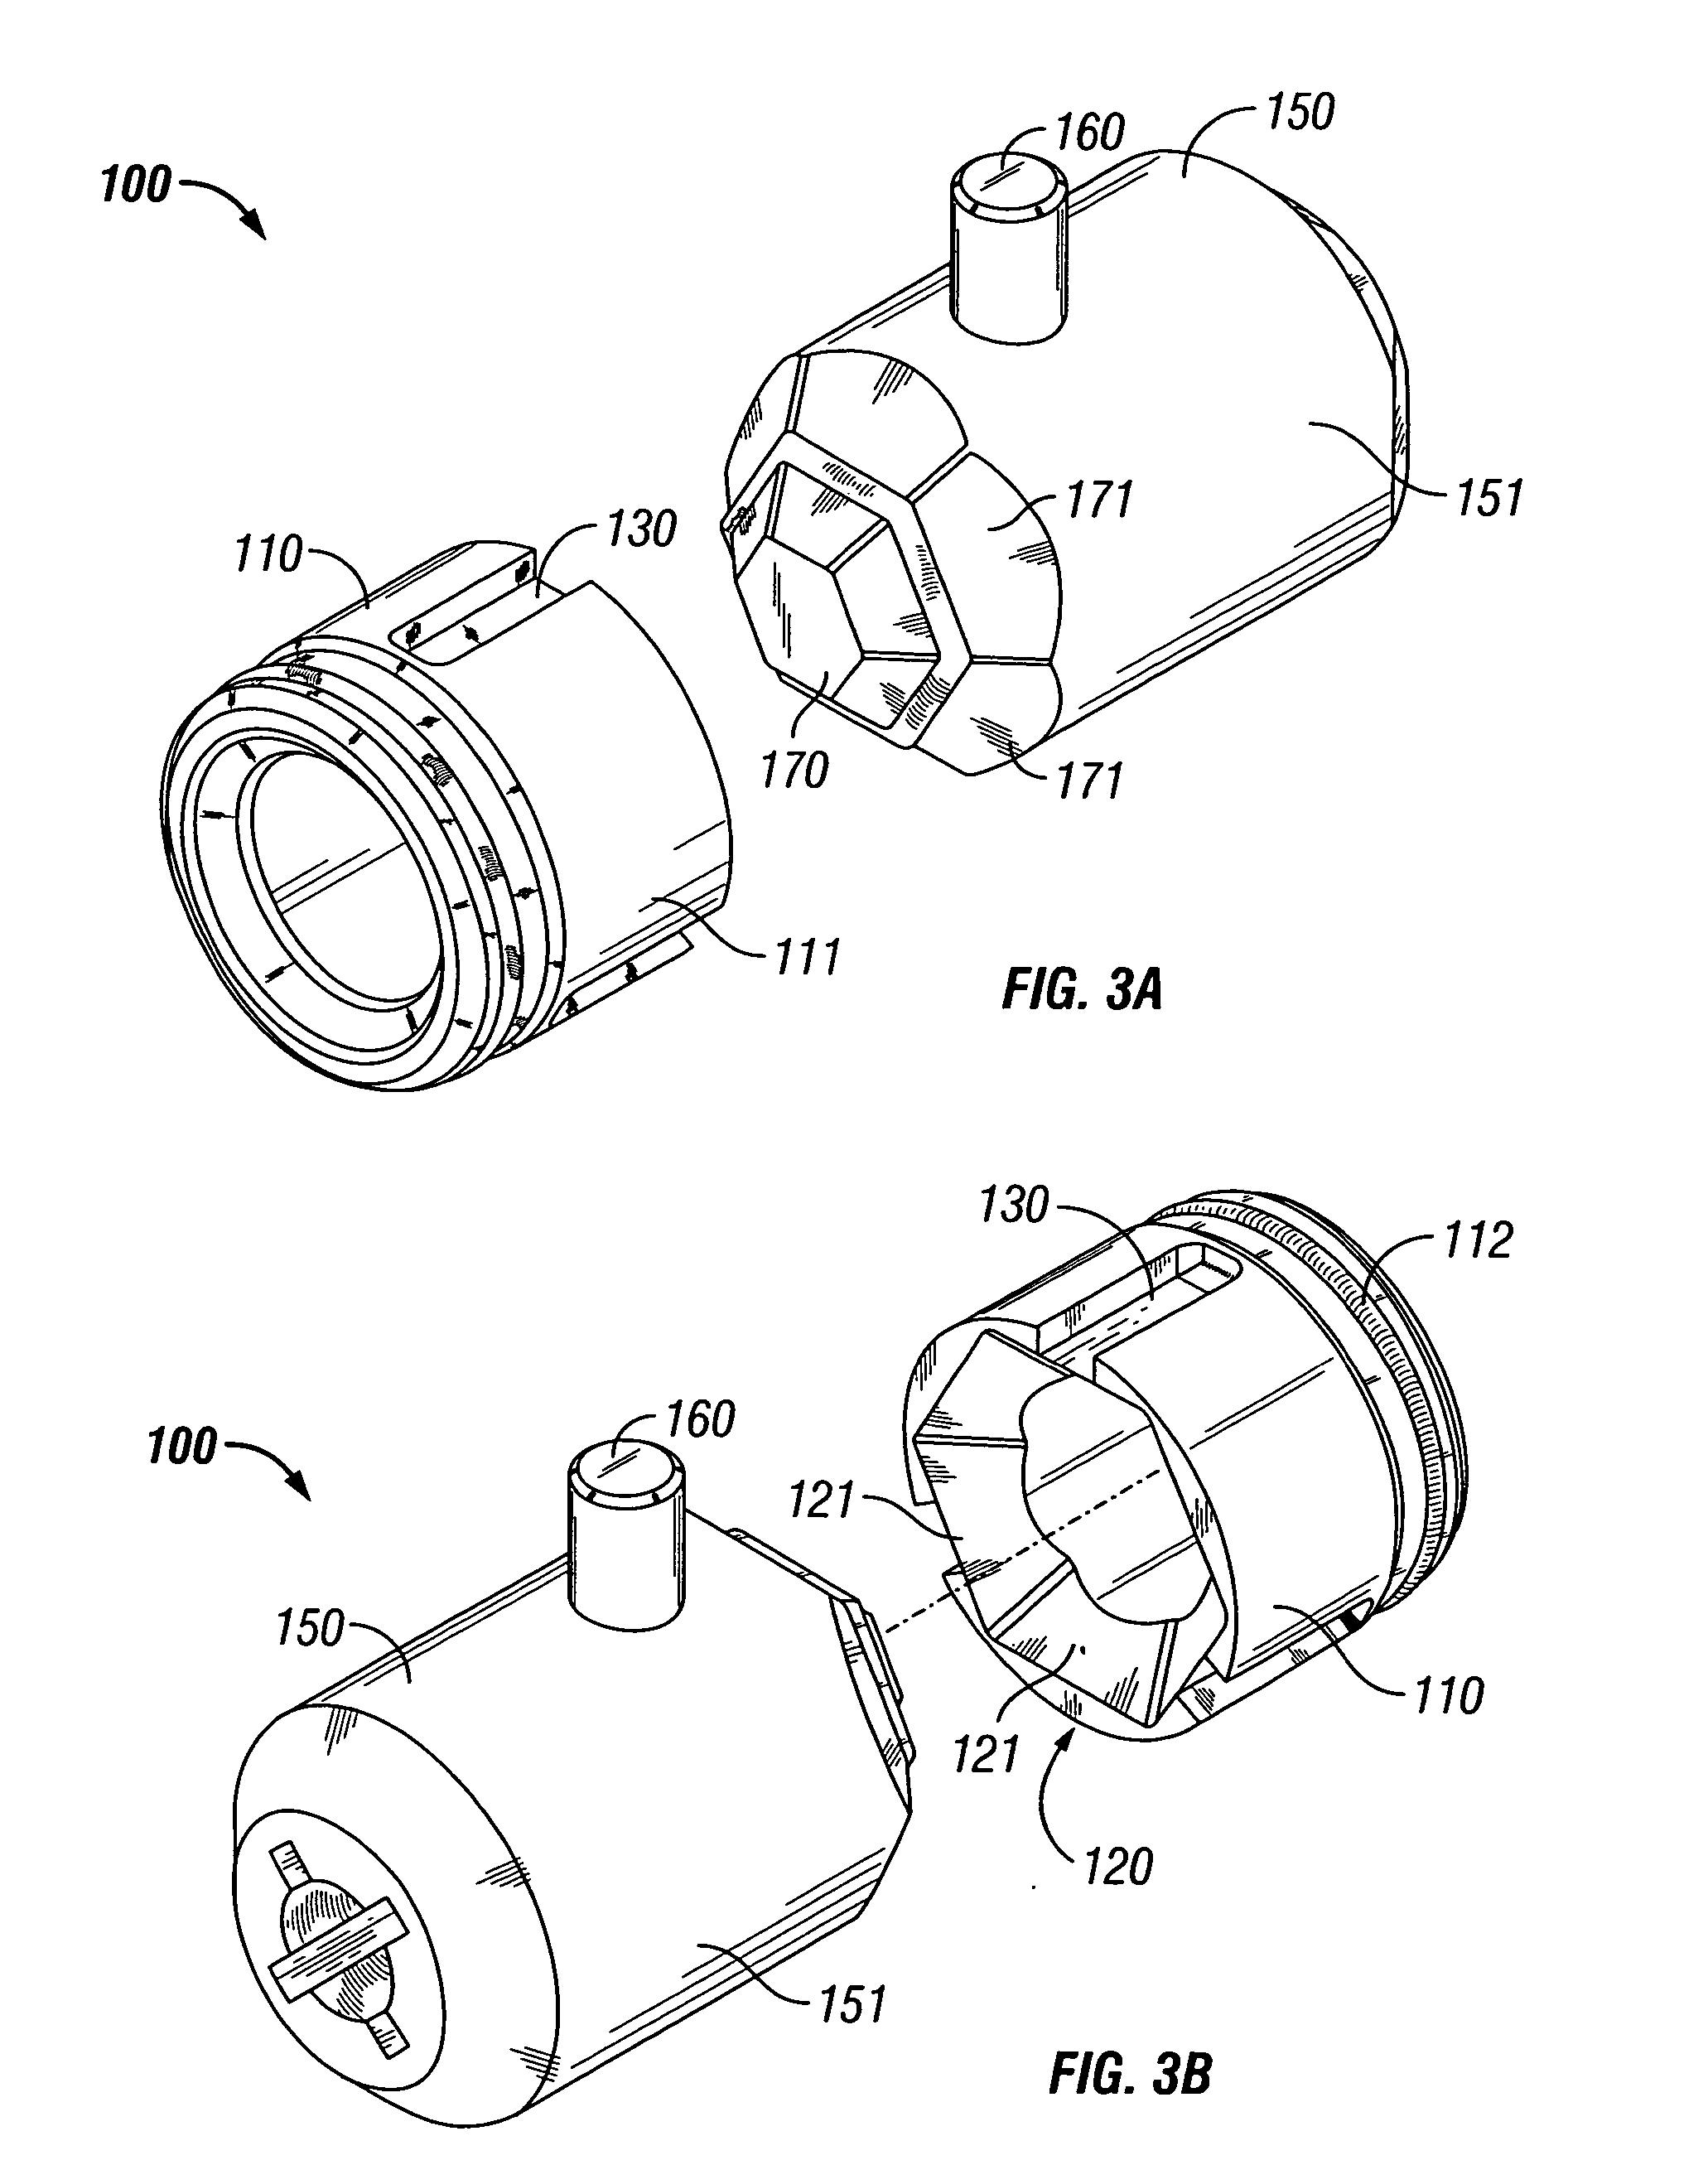 Gravity valve for a downhole tool